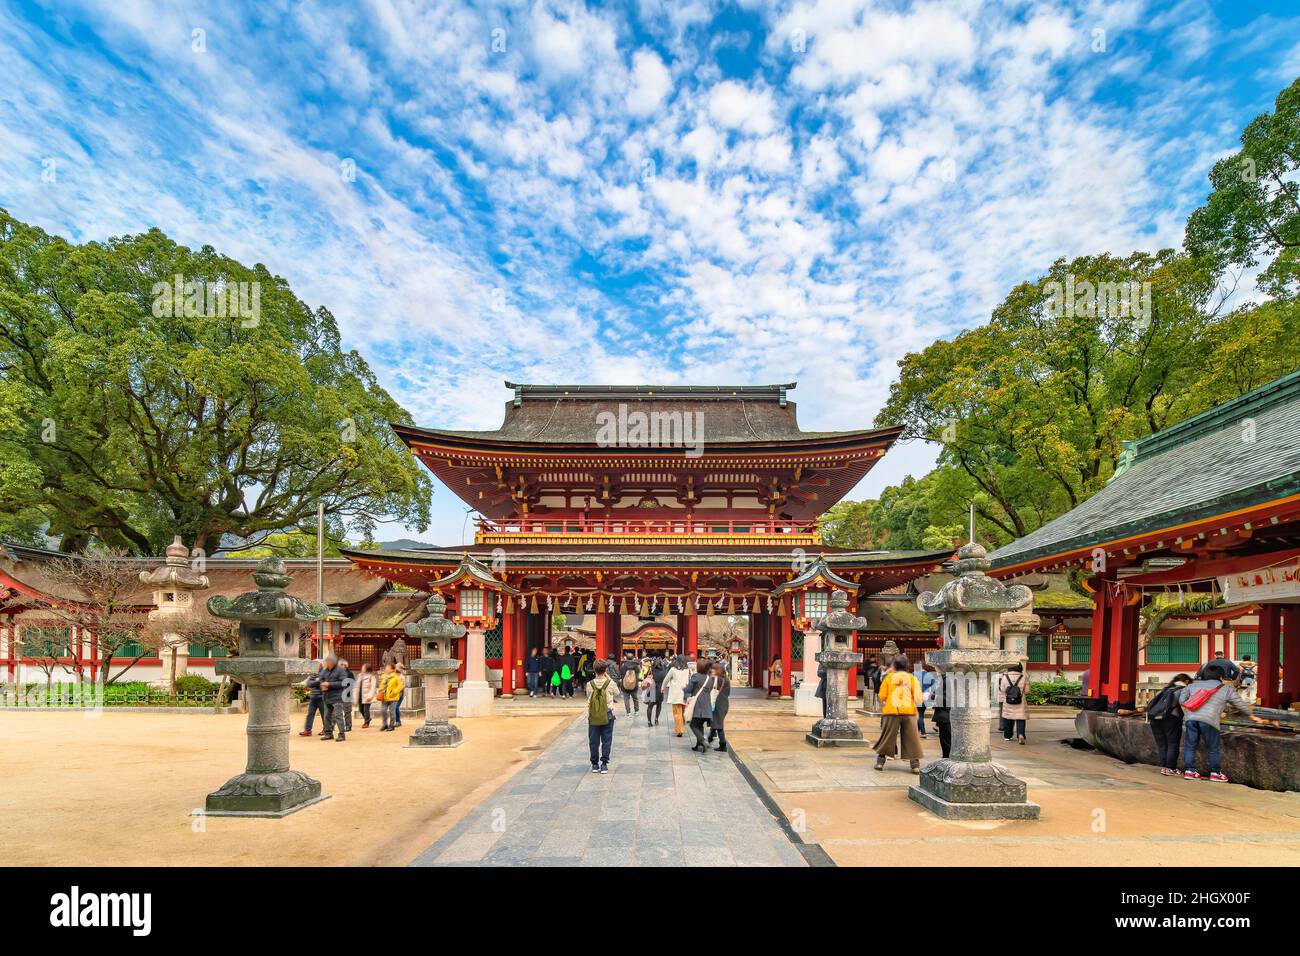 tokyo, japan - december 07 2019: Tourists walking along the sandō pathway surrounded by kasuga stone lantern leading to the two-storied Rōmon gate of Stock Photo